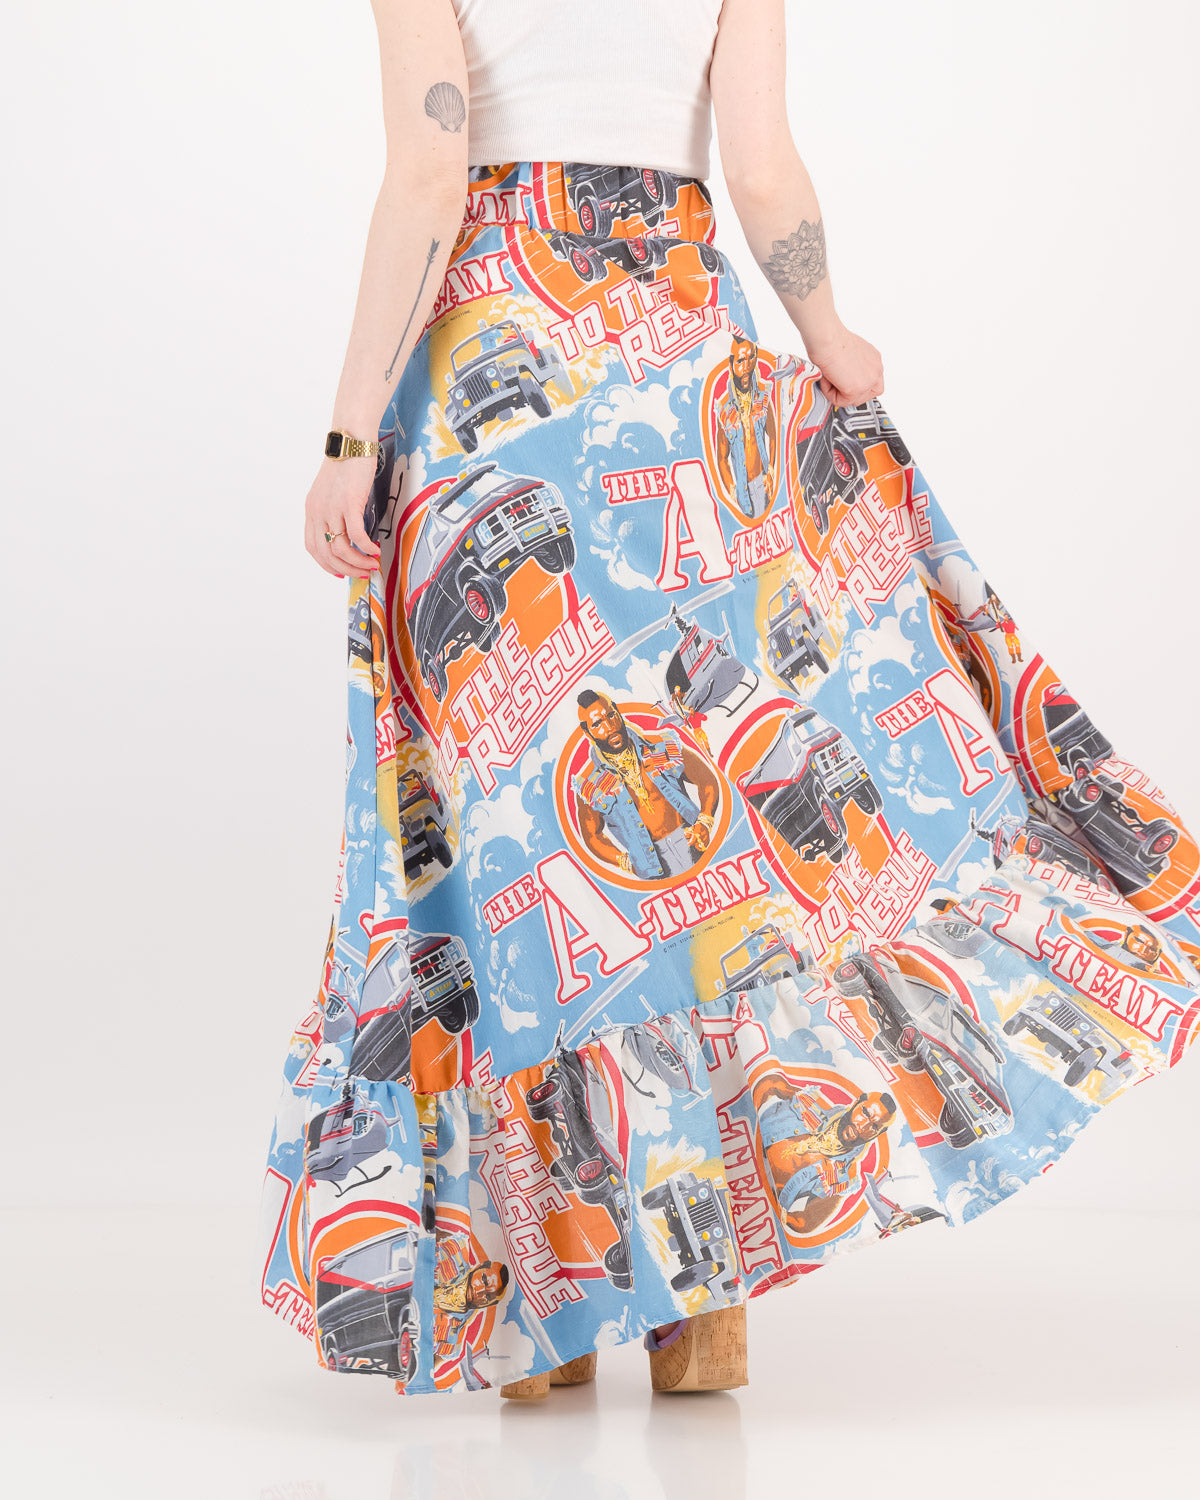 Upcycled Vintage 80's A-Team Maxi Skirt S/M